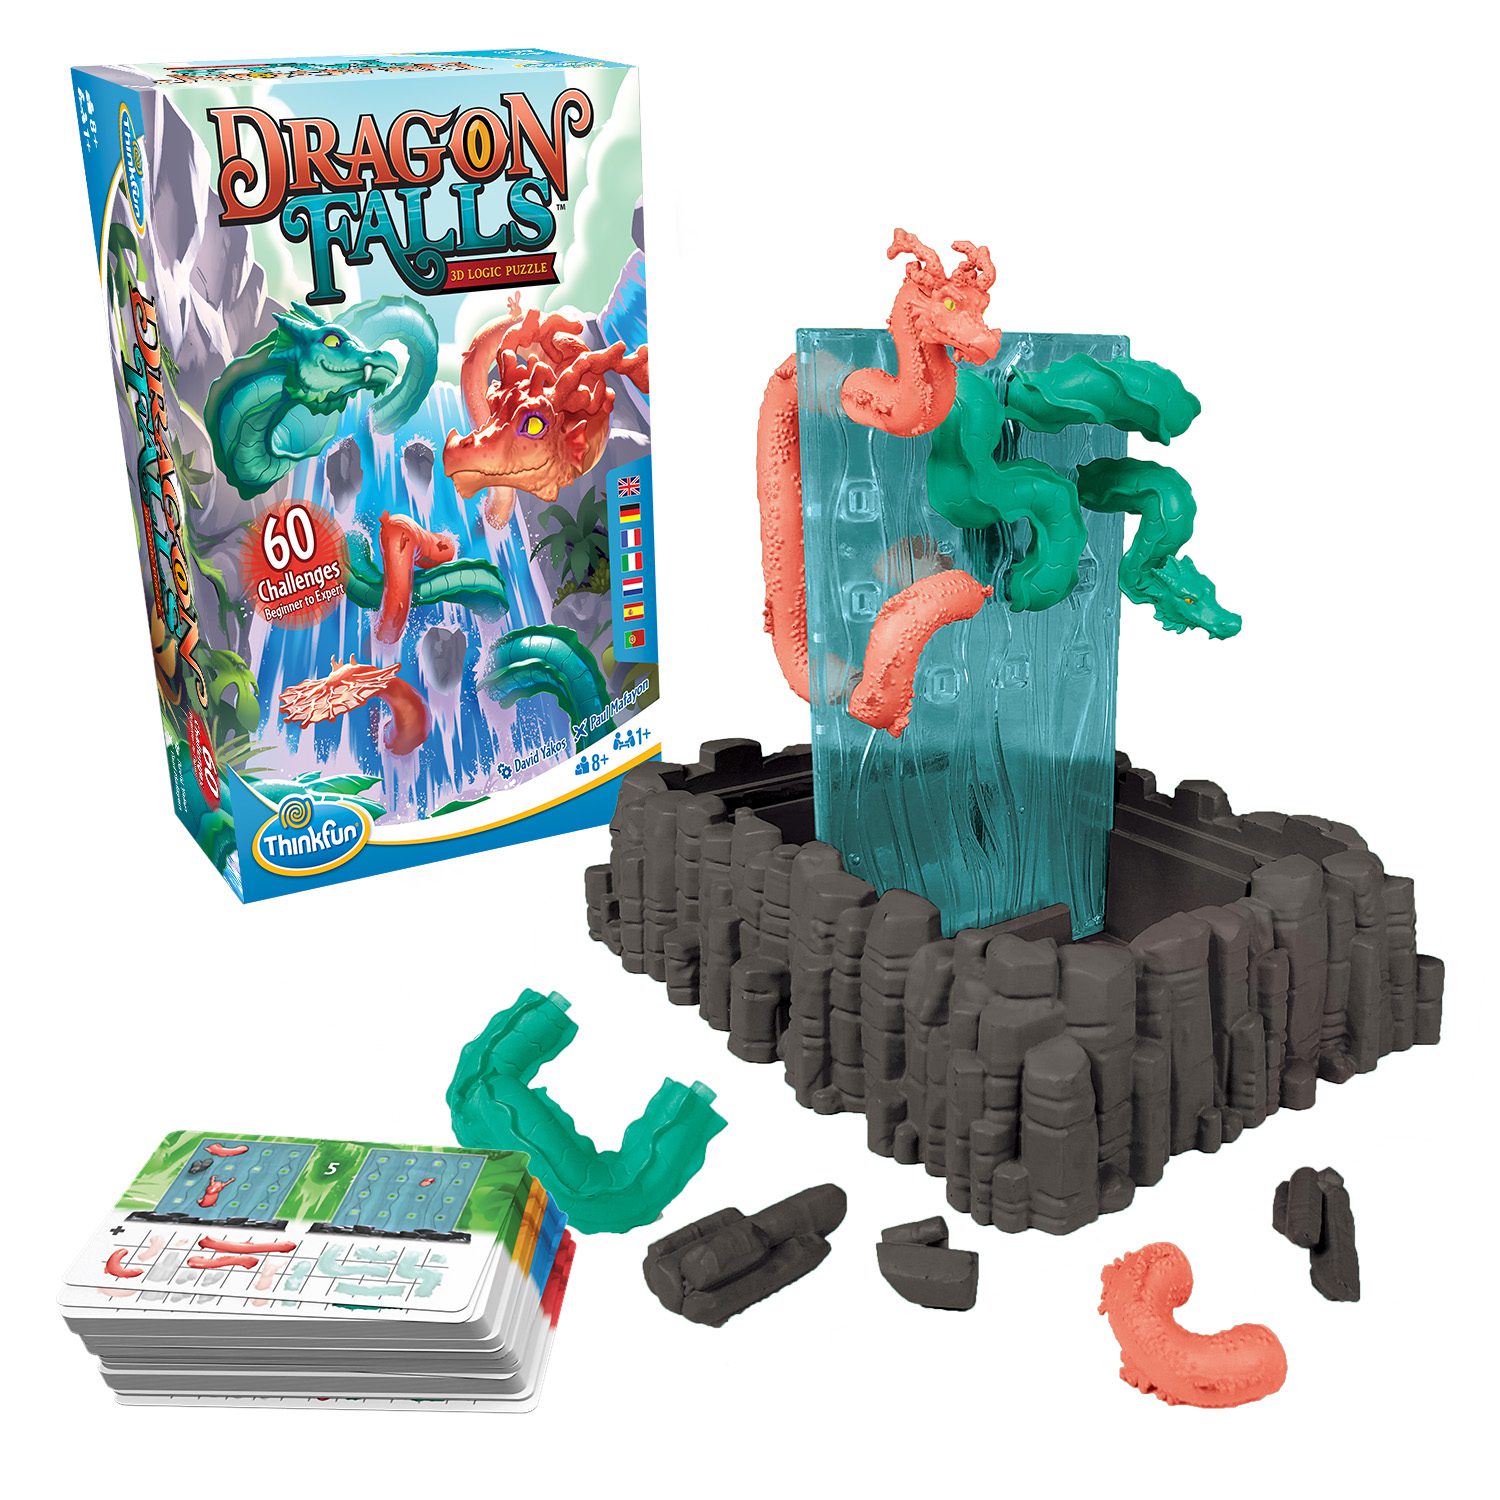 dragon falls contents, black base, green and coral dragon pieces, waterfall rocks, and a blue waterfall structure